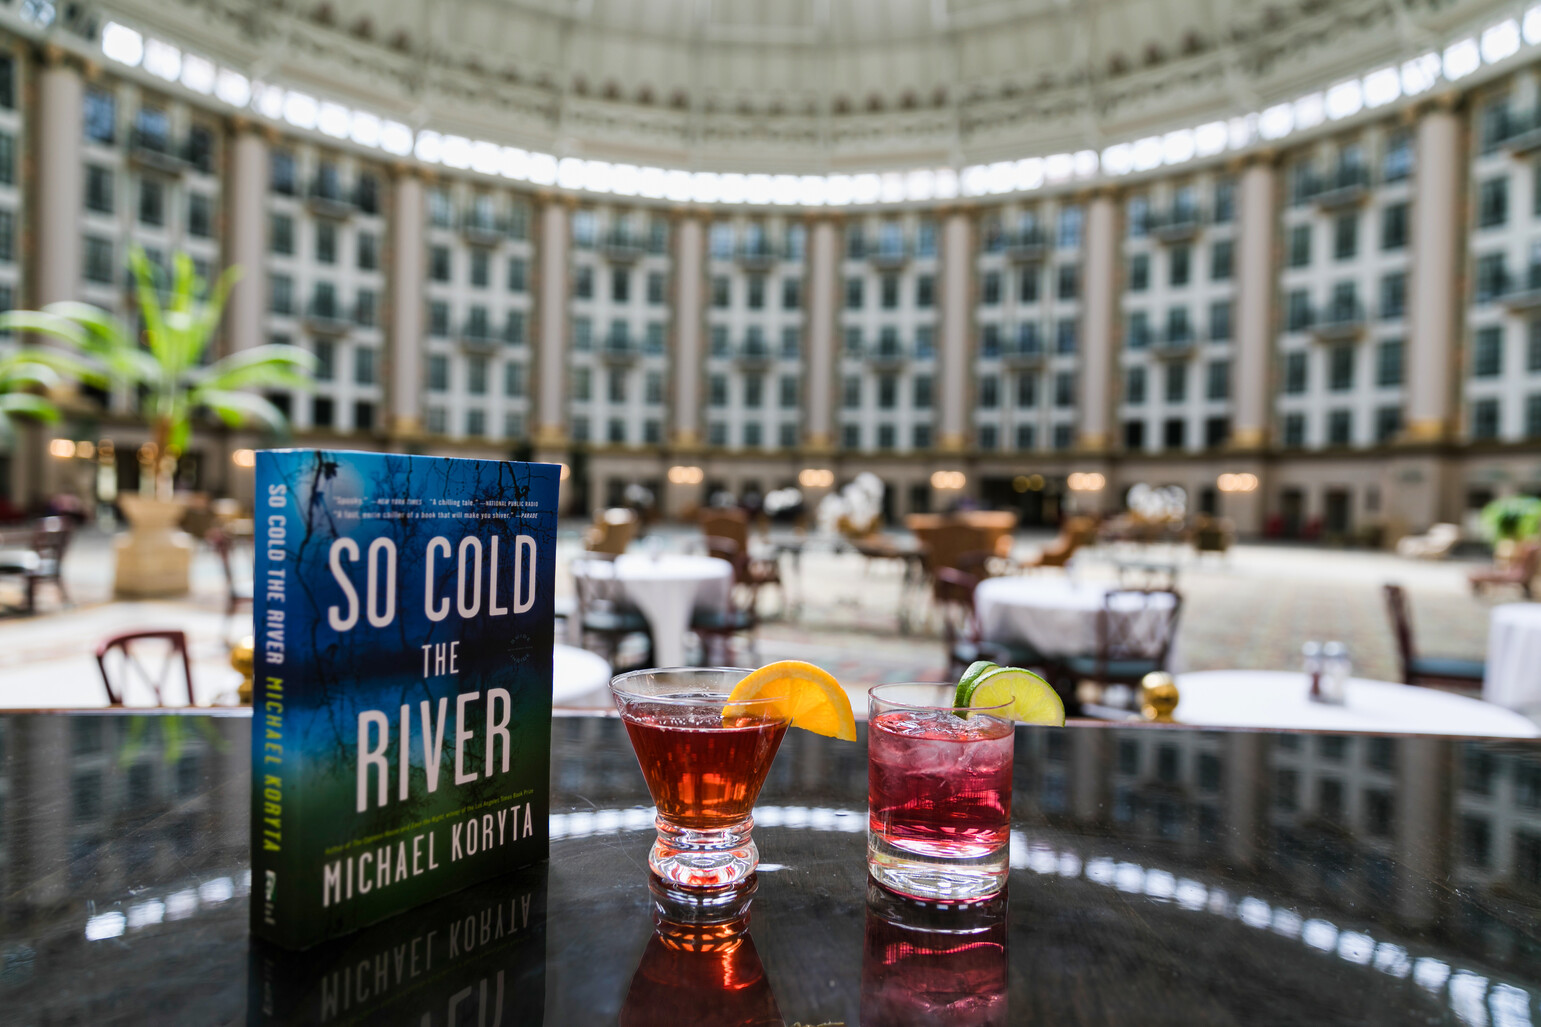 So cold the River book and cocktails